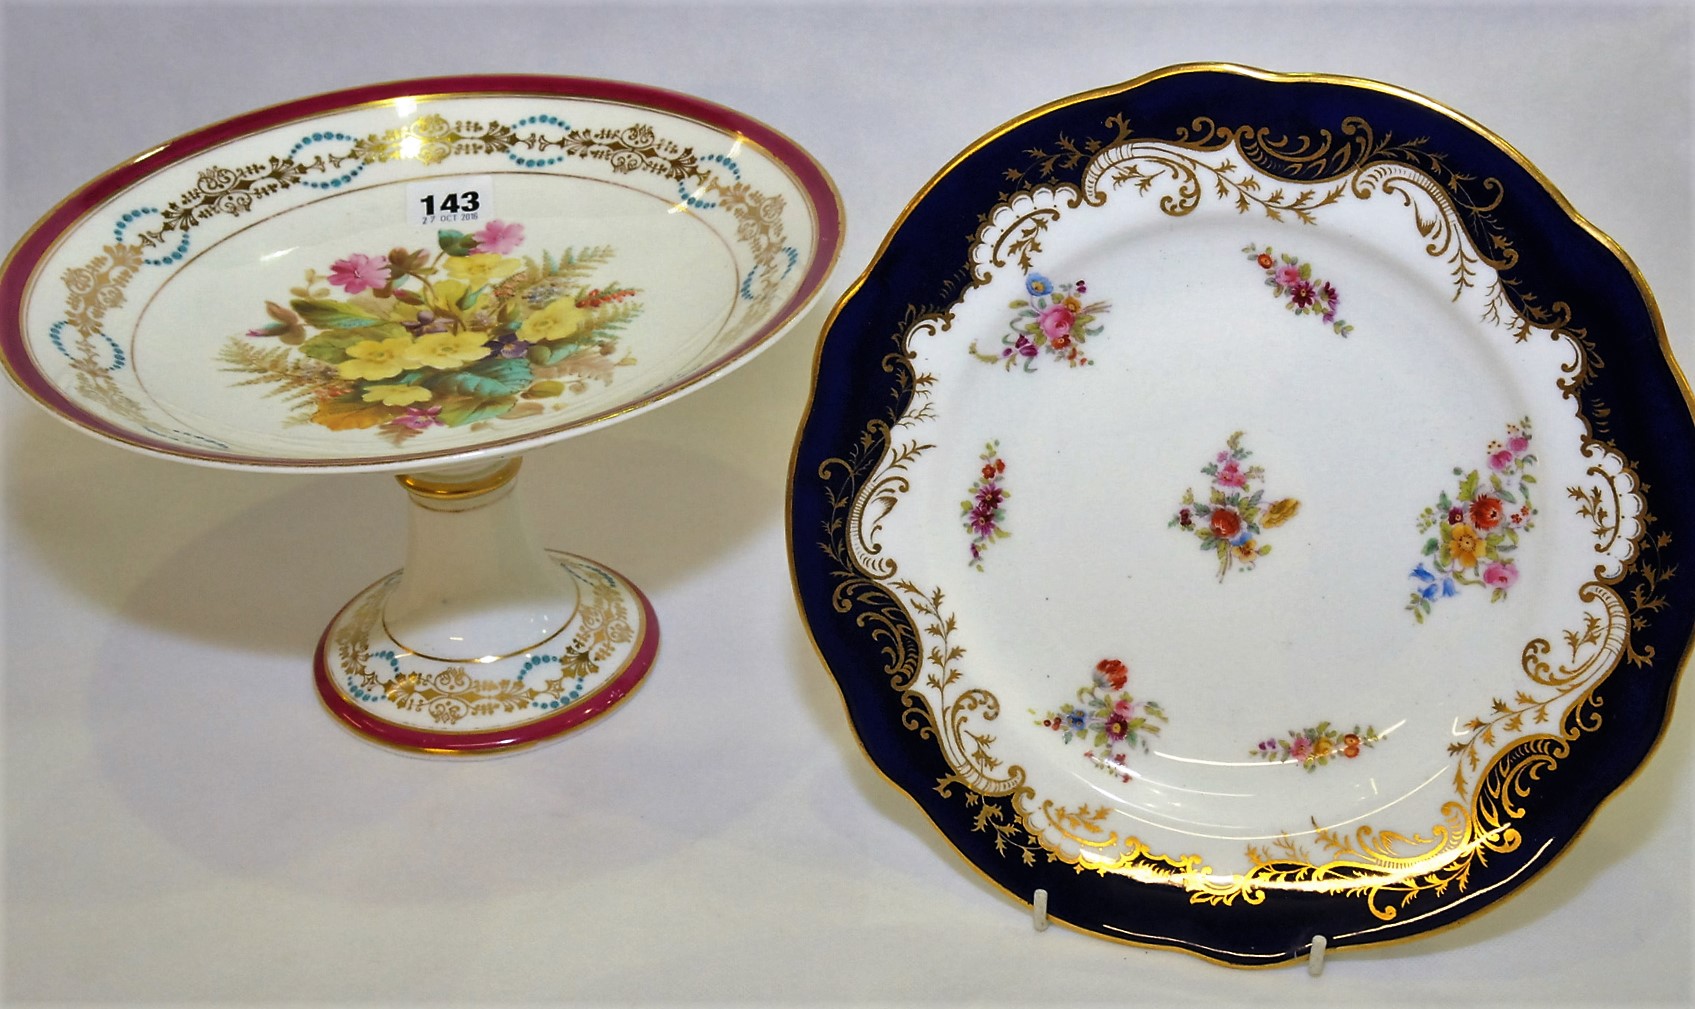 19th century English porcelain dessert comport with central polychrome floral decoration surrounded